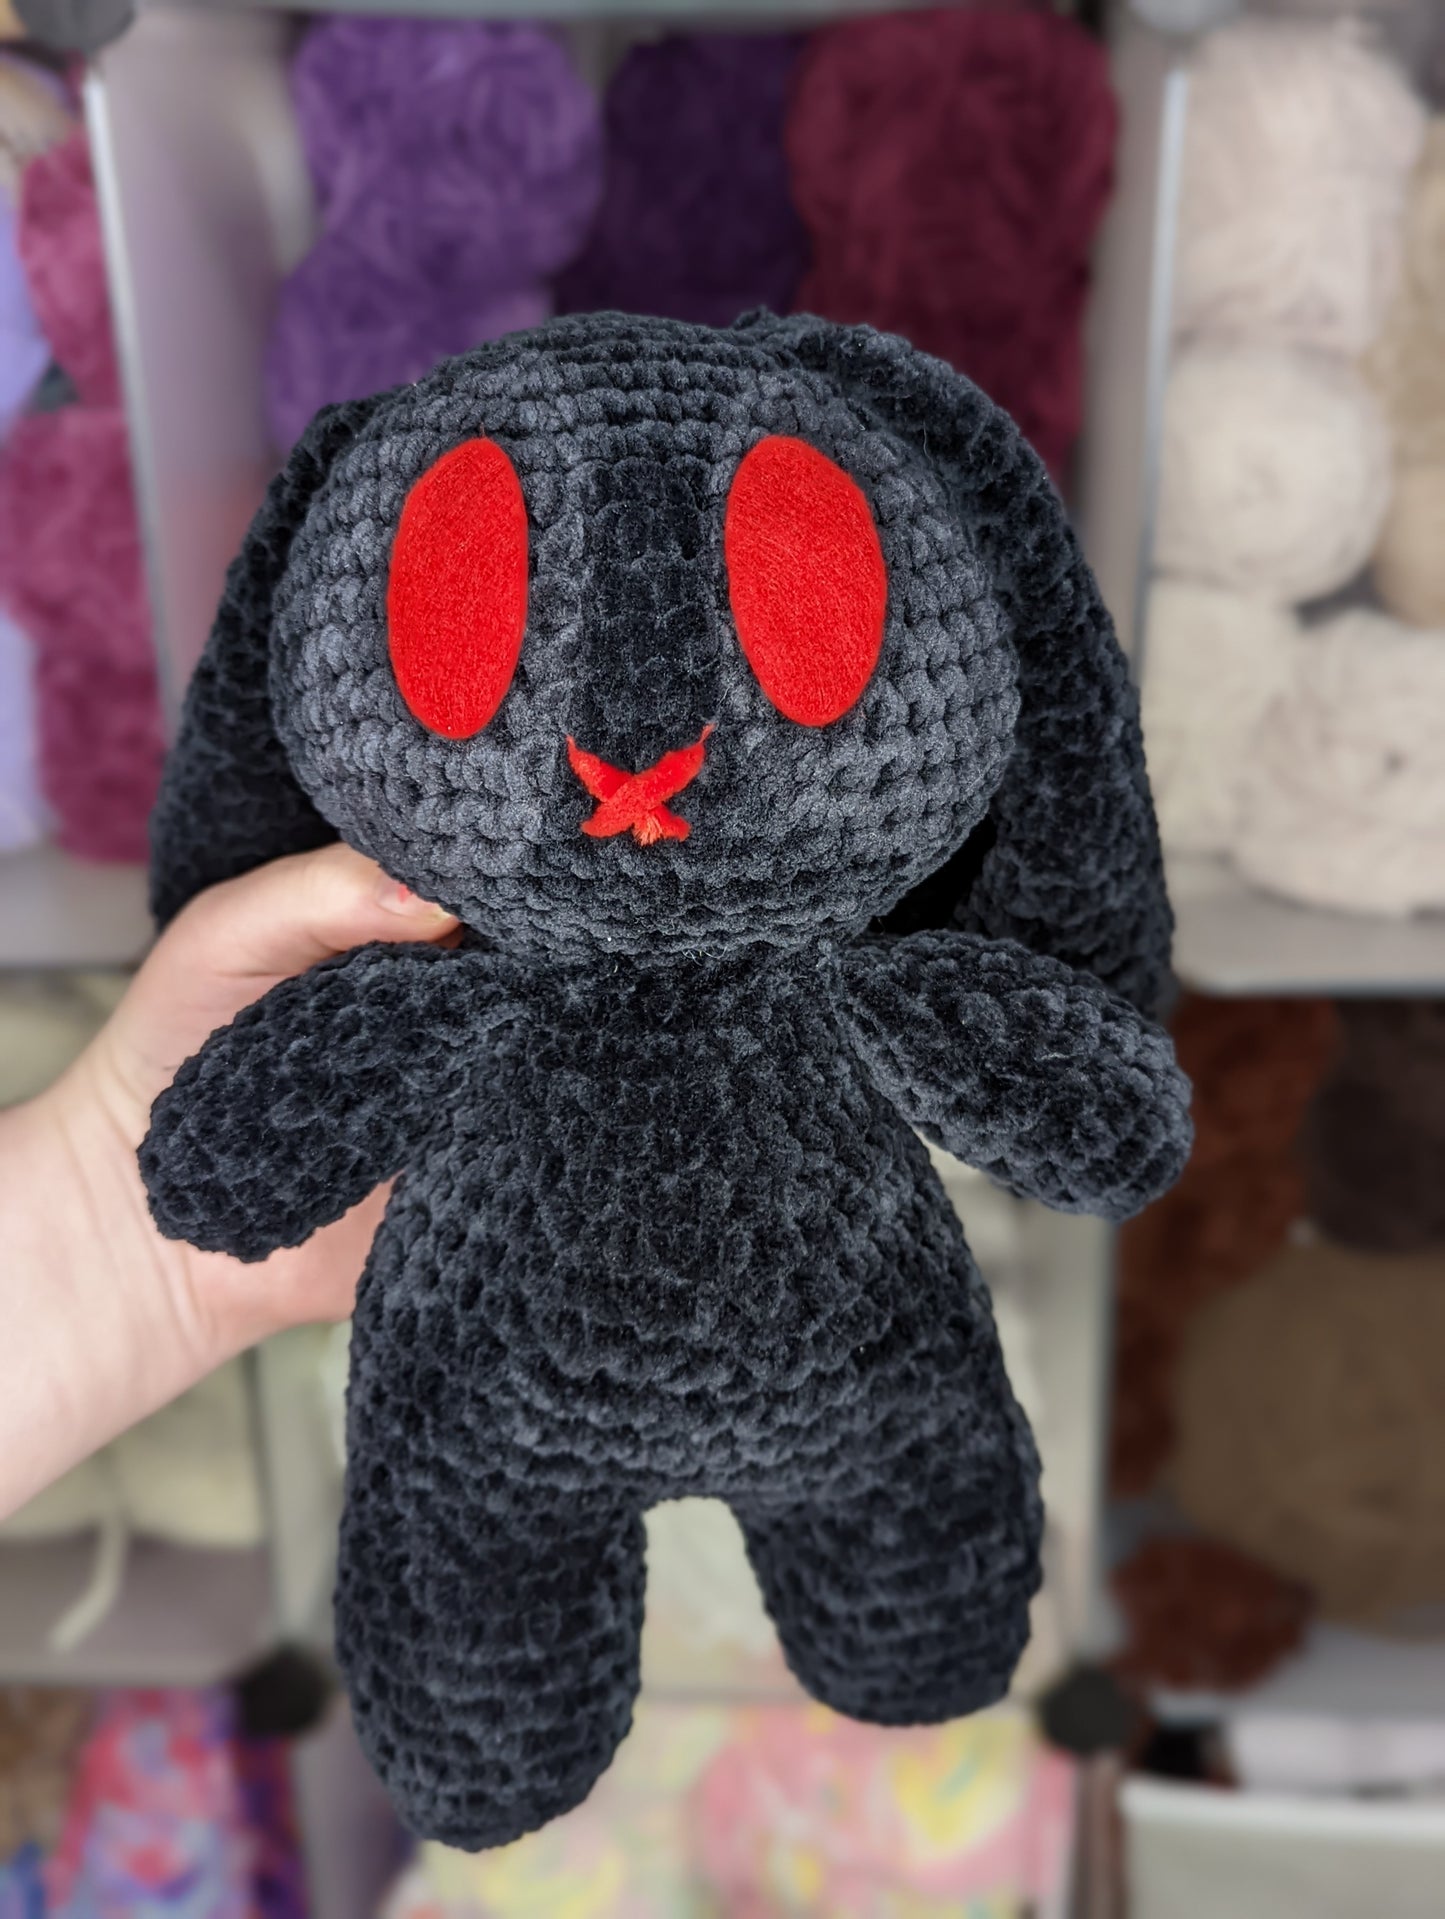 Goth Spooky Bunny Crochet Plushie [Archived]